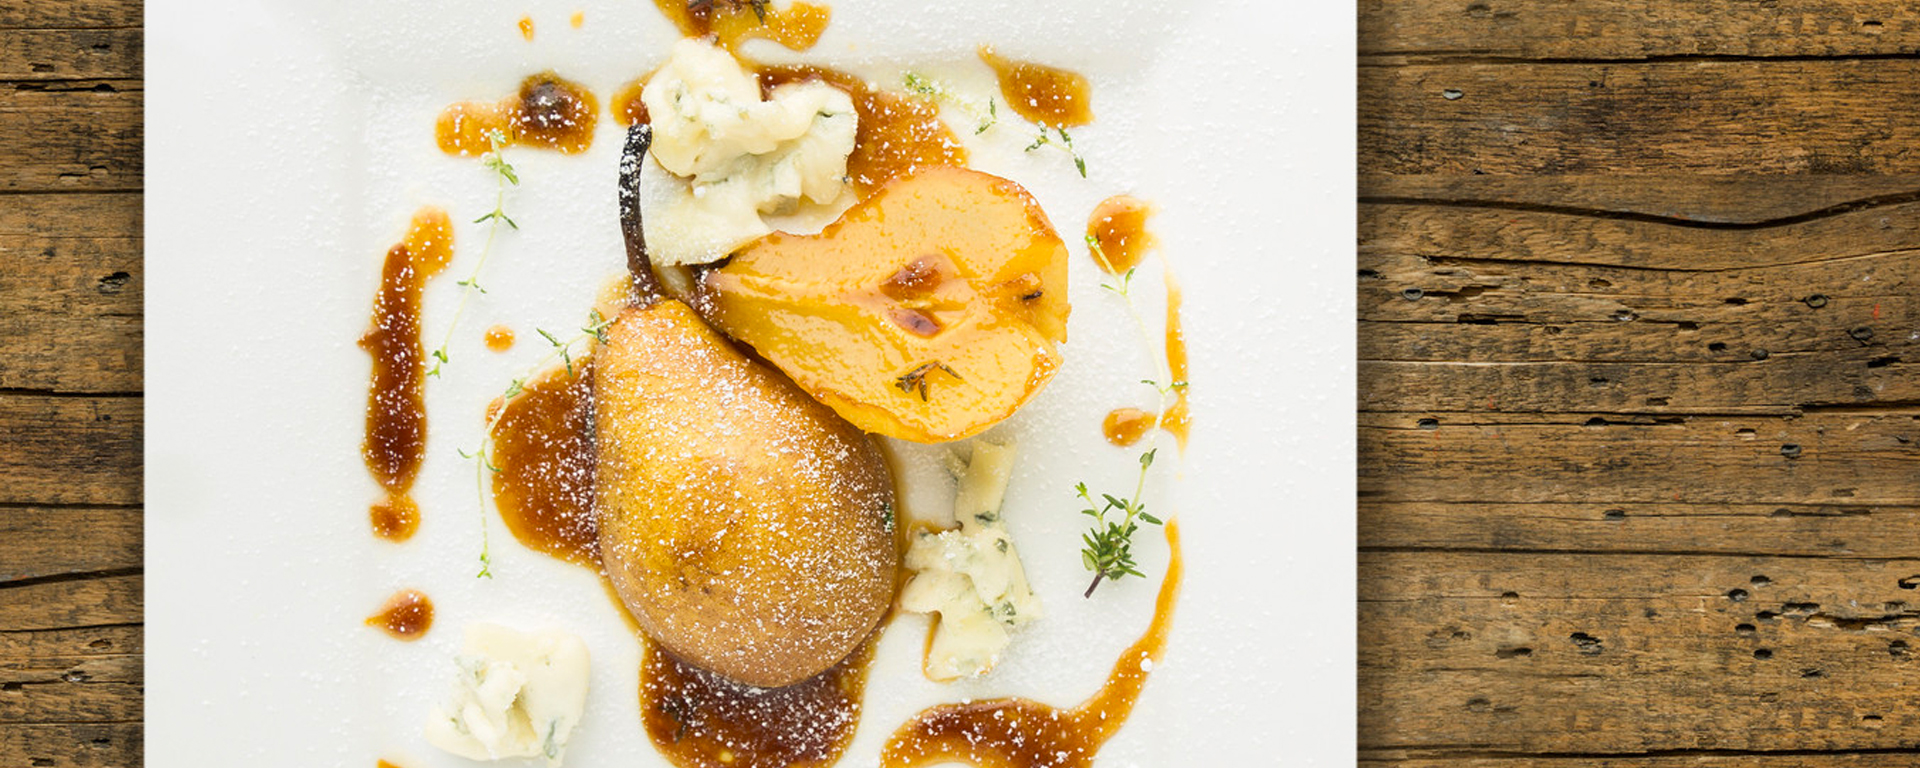 Photo for - Roasted Pears with Pepato Cheese